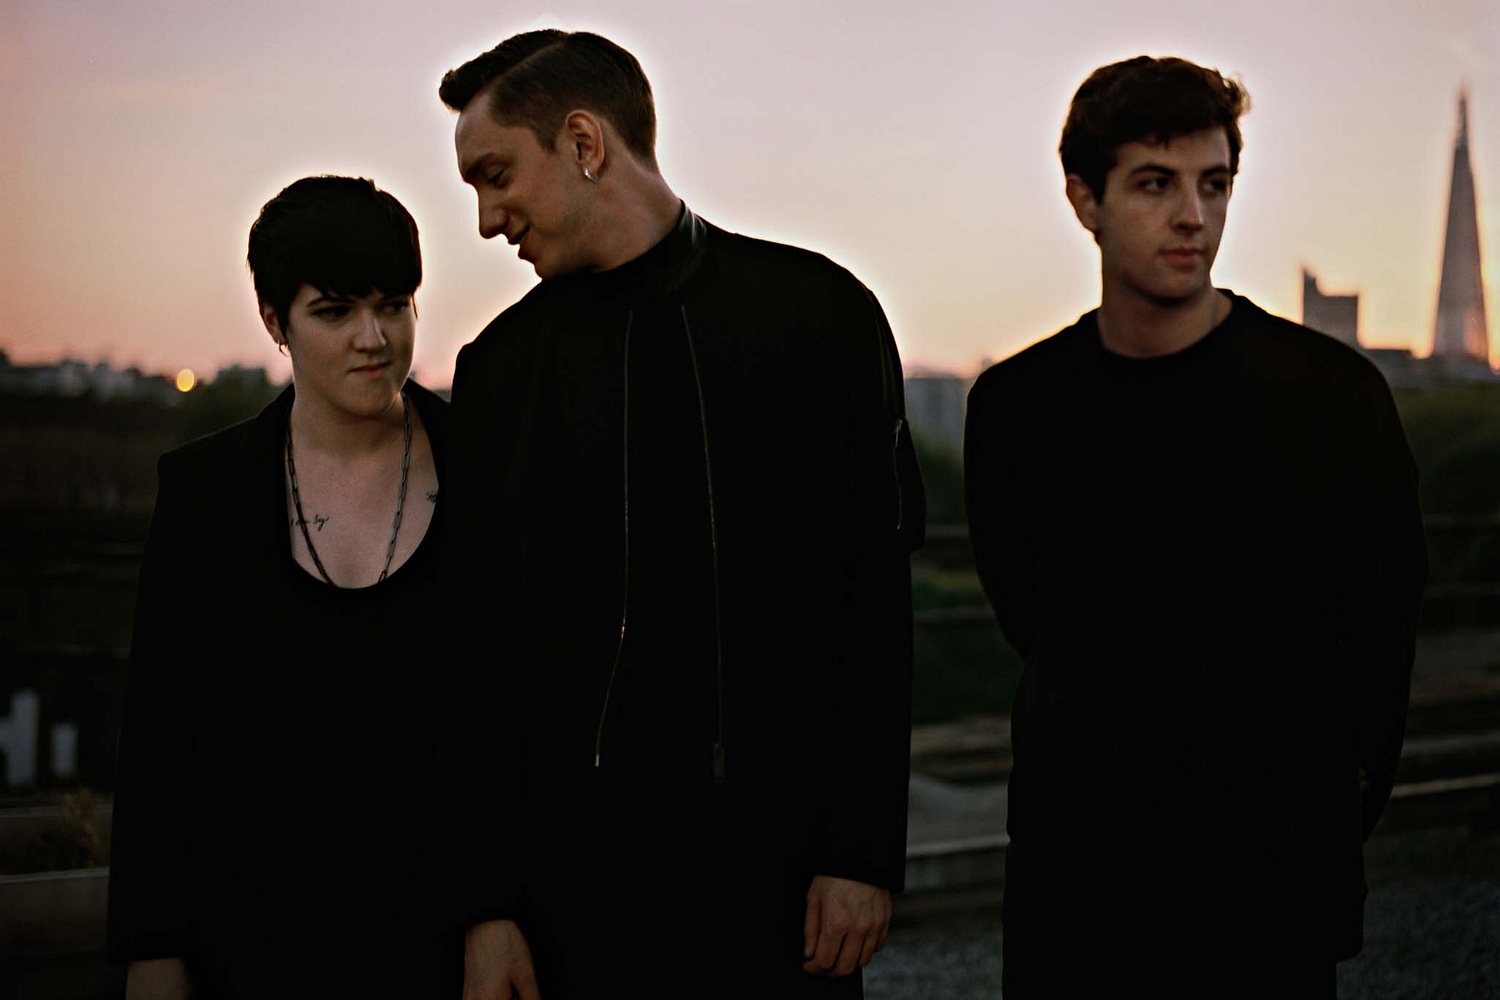 The xx are back! They’re on the line-up for Lollapalooza Brazil 2017